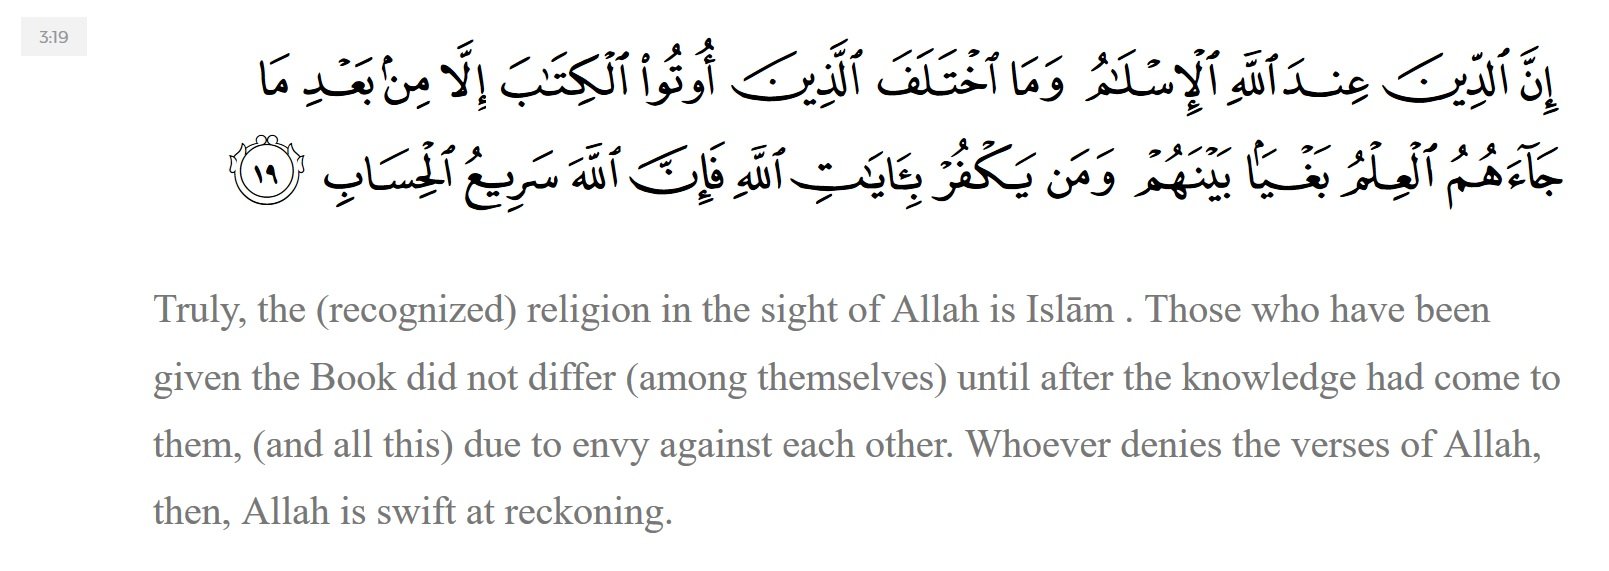 Quran about Islam1